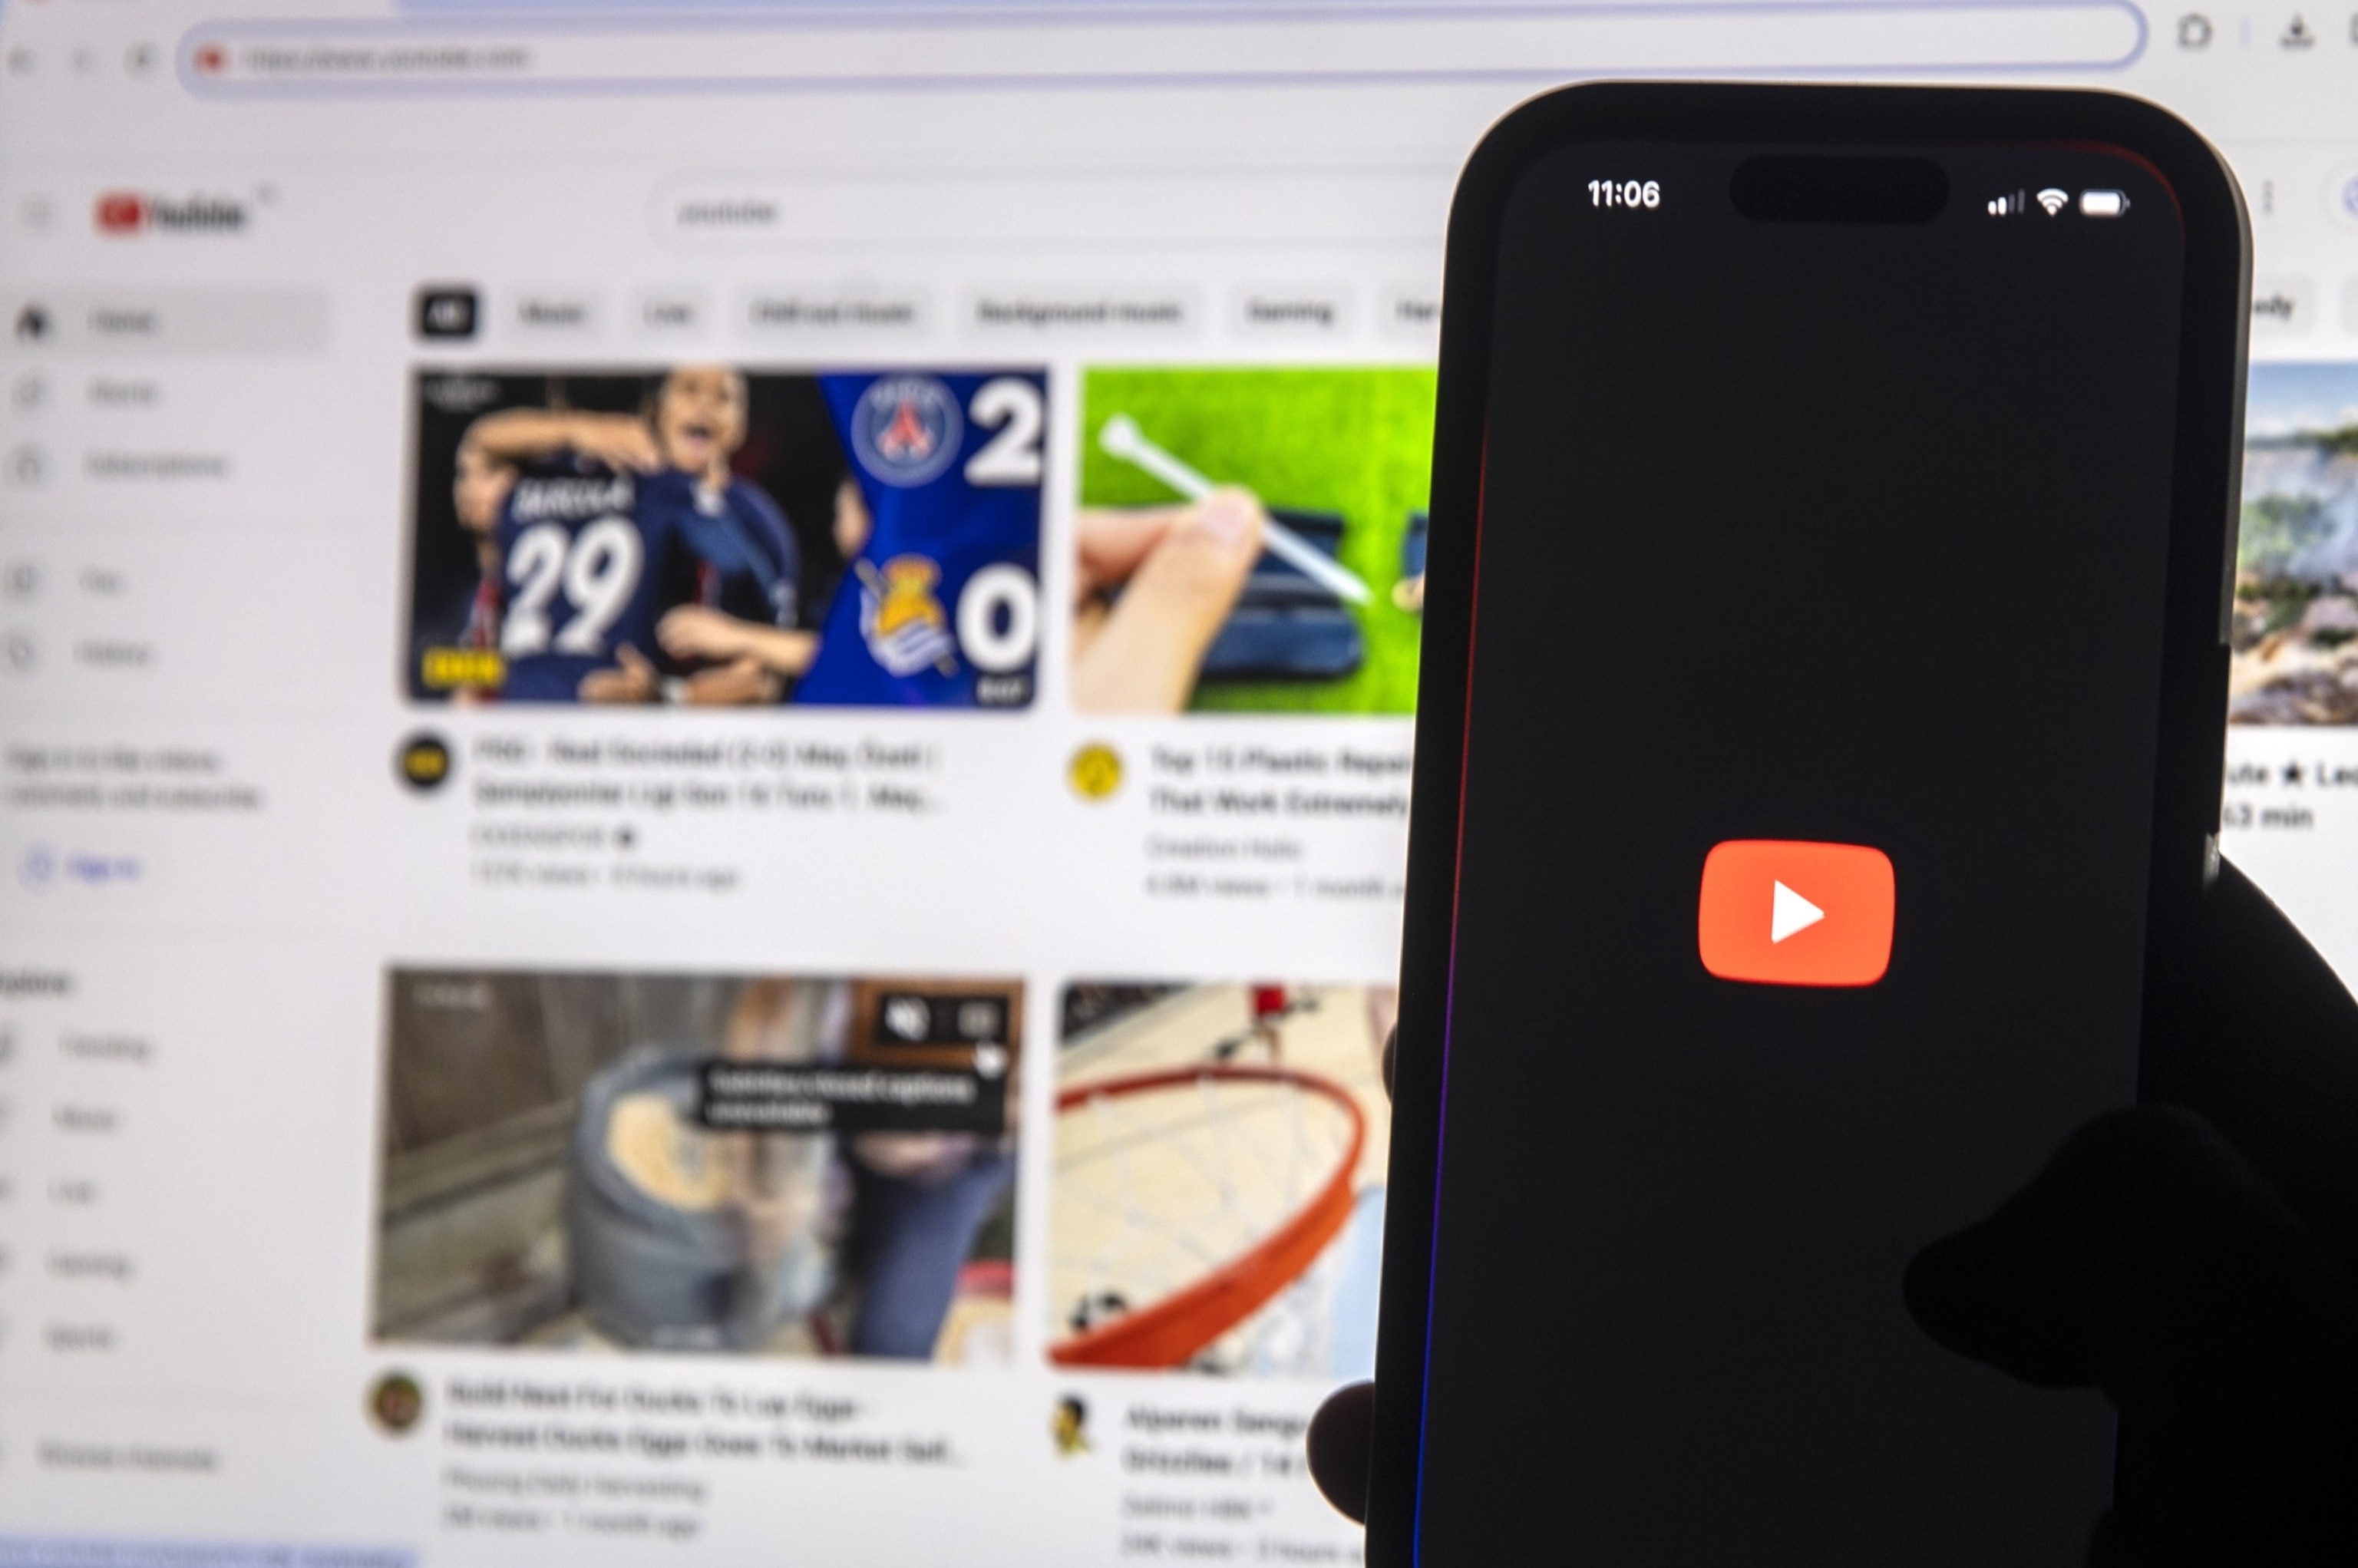 PHOTO: Youtube is displayed on mobile phone.